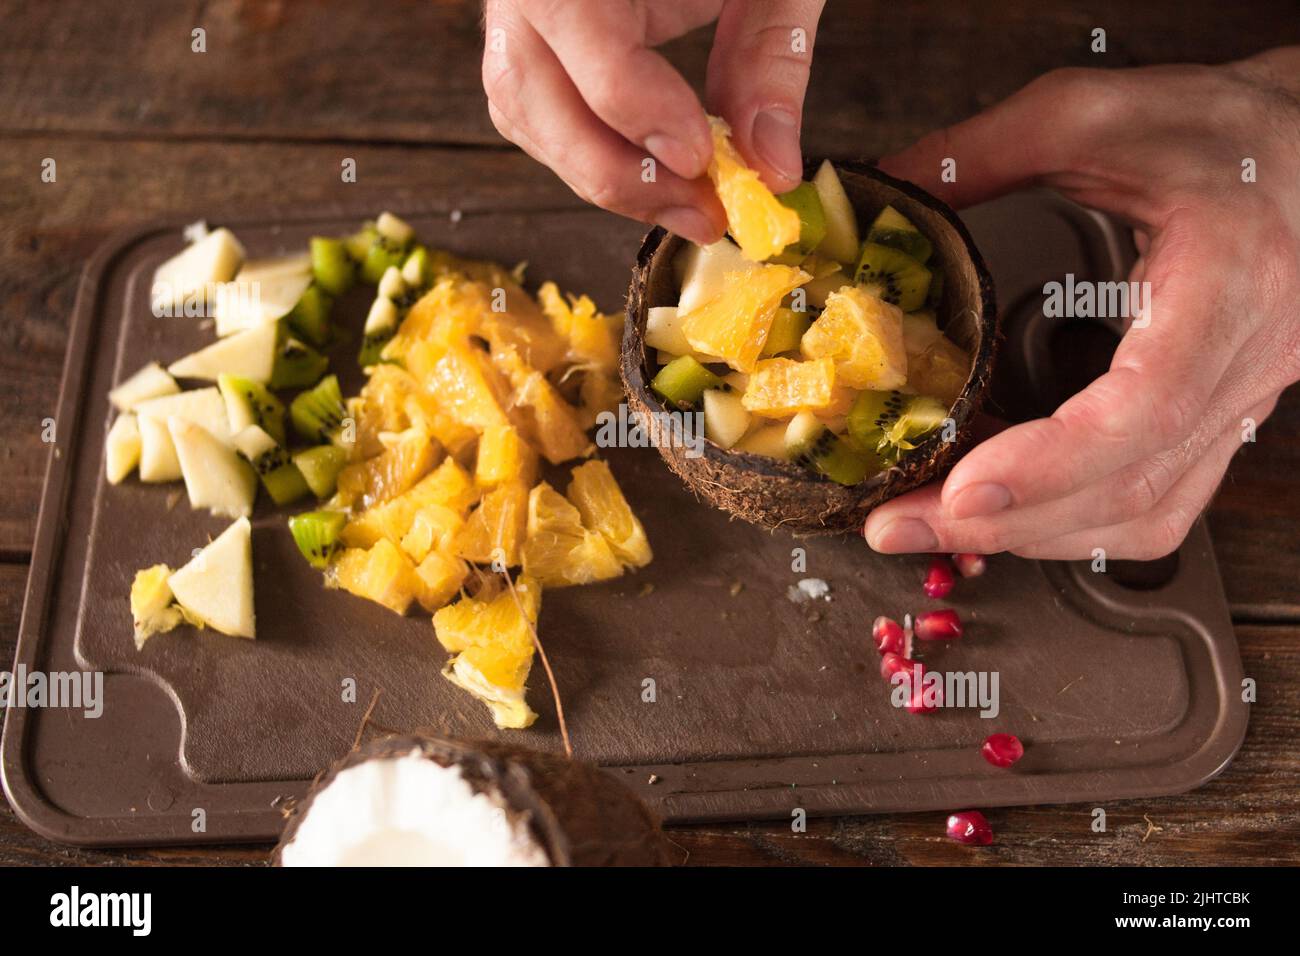 Preparing of fruit salad in coconut shell Stock Photo